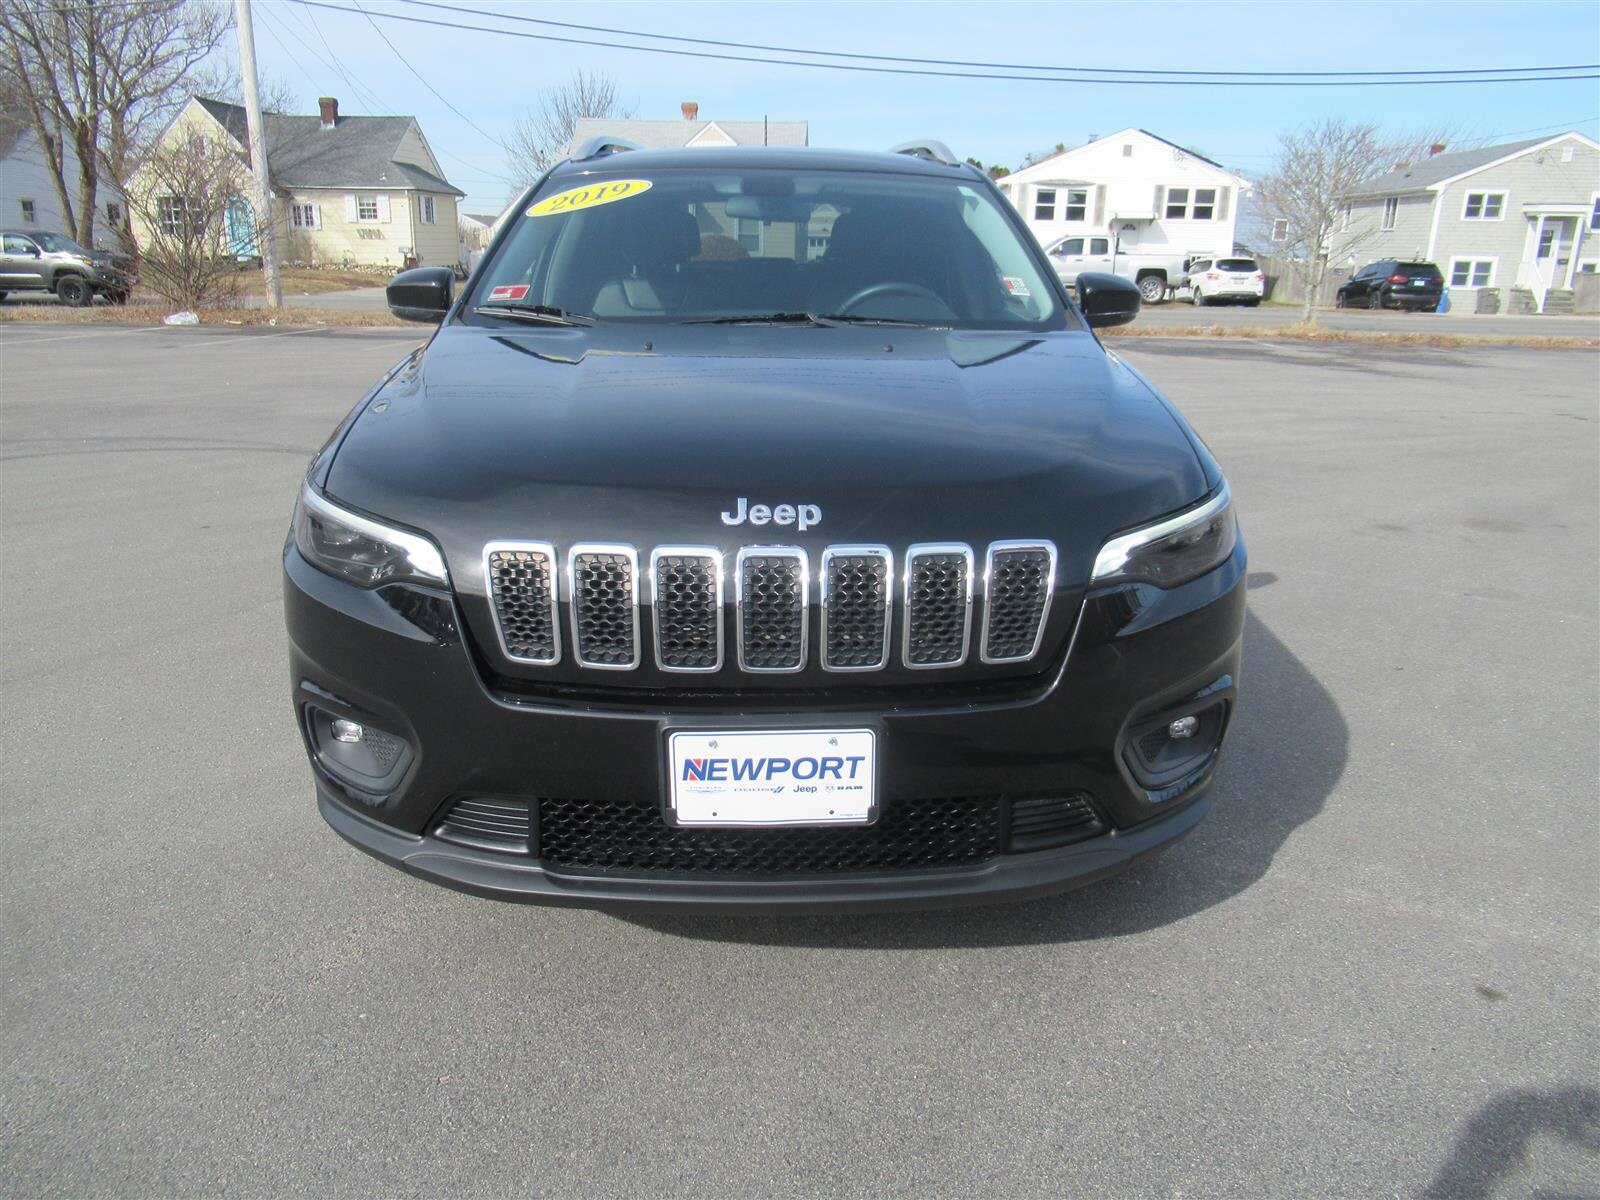 Used 2019 Jeep Cherokee Latitude Plus with VIN 1C4PJMLB1KD355058 for sale in Middletown, RI